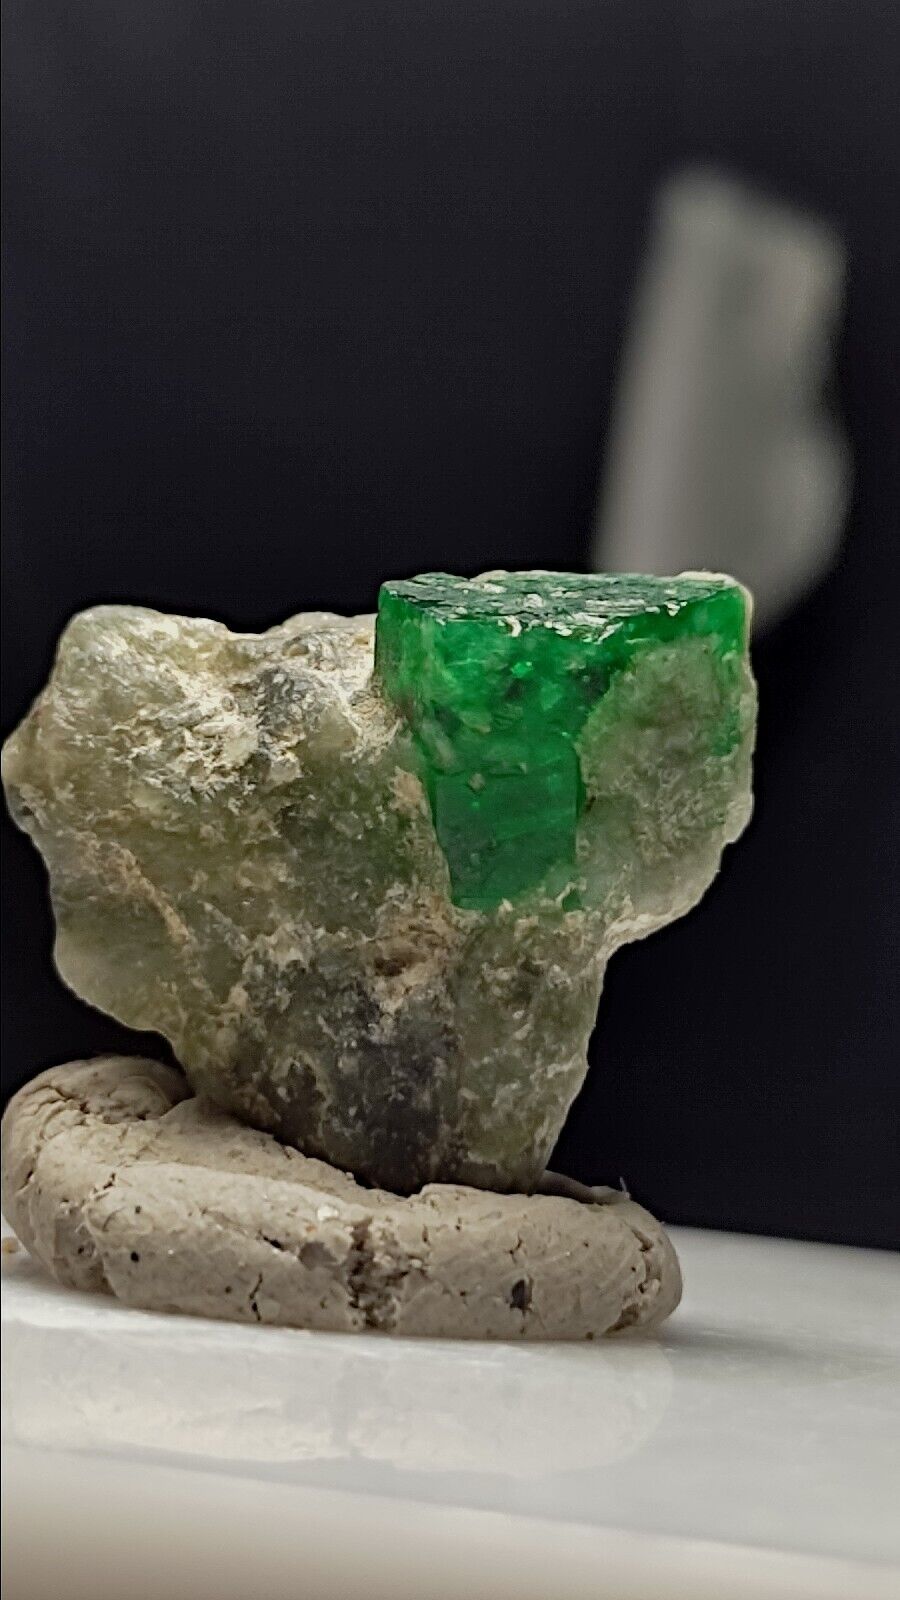 6gram Emerald crystal rough specimen collection peice from Swat Valley Pakistan